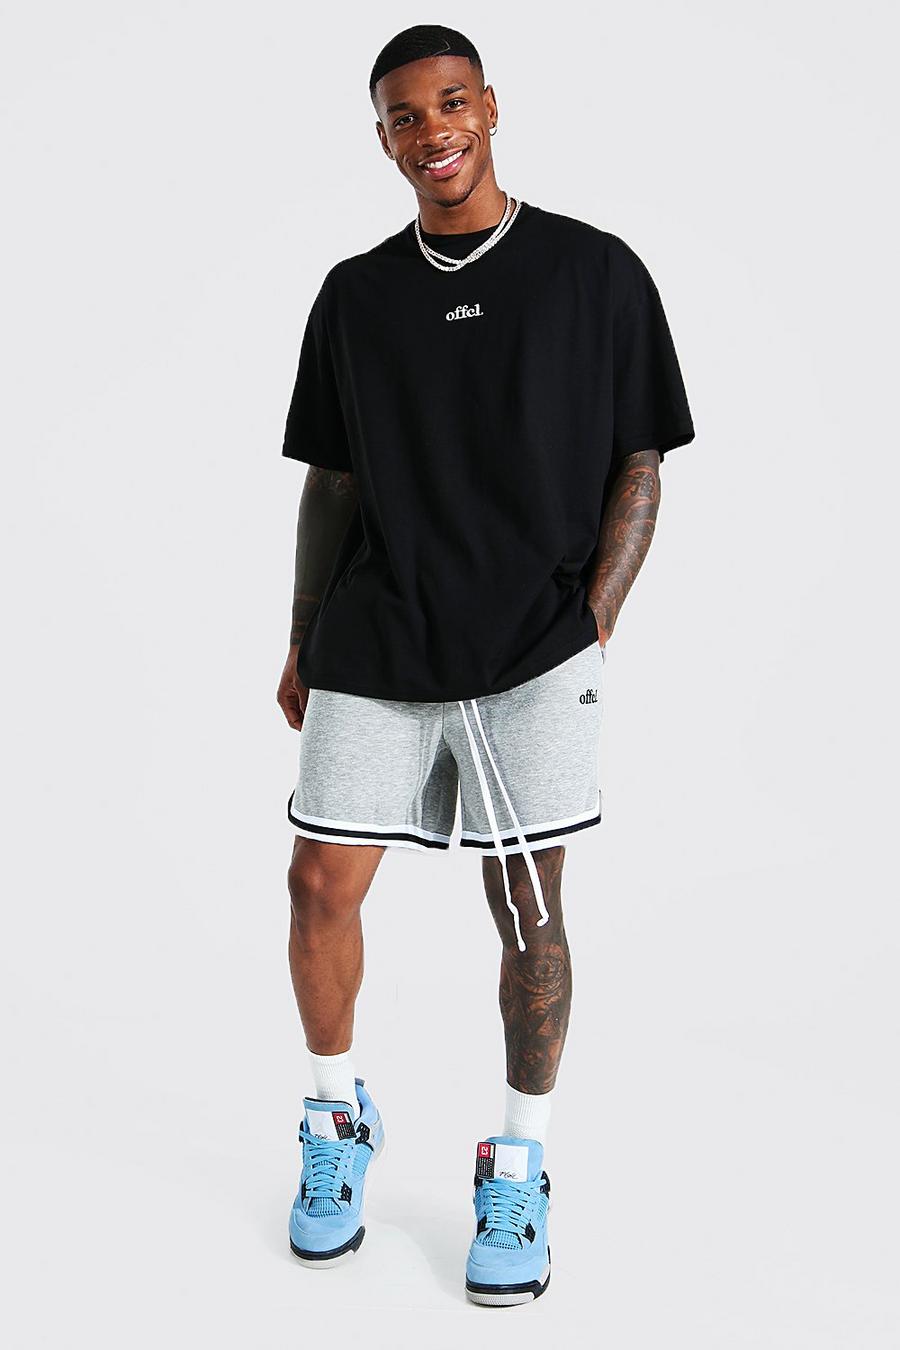 Black Oversized Offcl Hi-lo Tee And Basketball Short image number 1